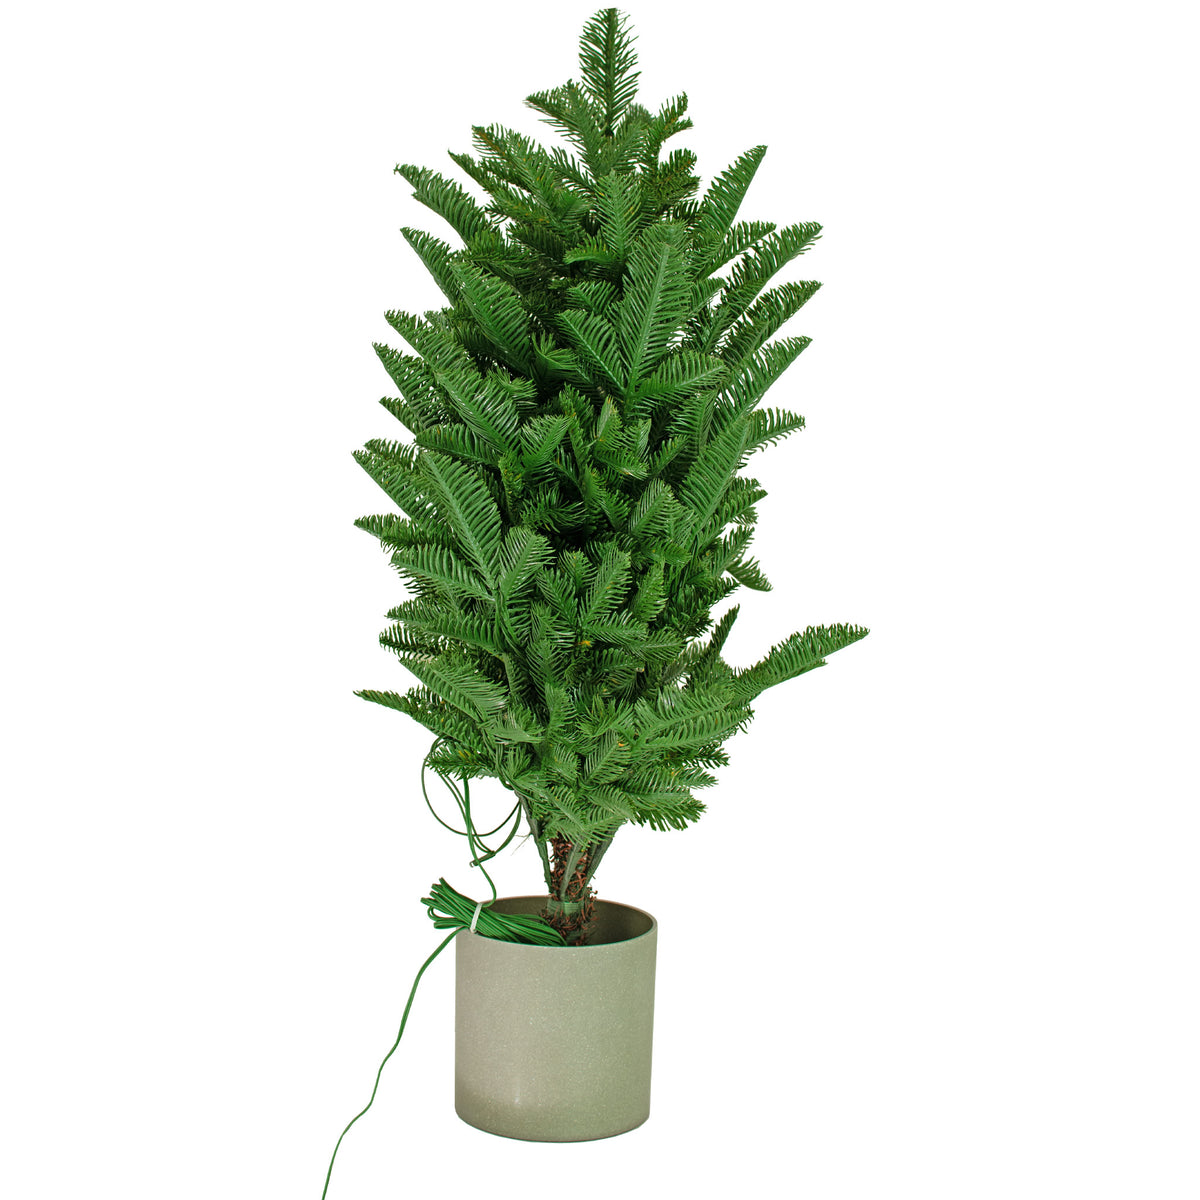 Vase Included: The Luxe Tabletop Pine Tree comes with a sparkling grey ceramic vase.  Ships all together in one box